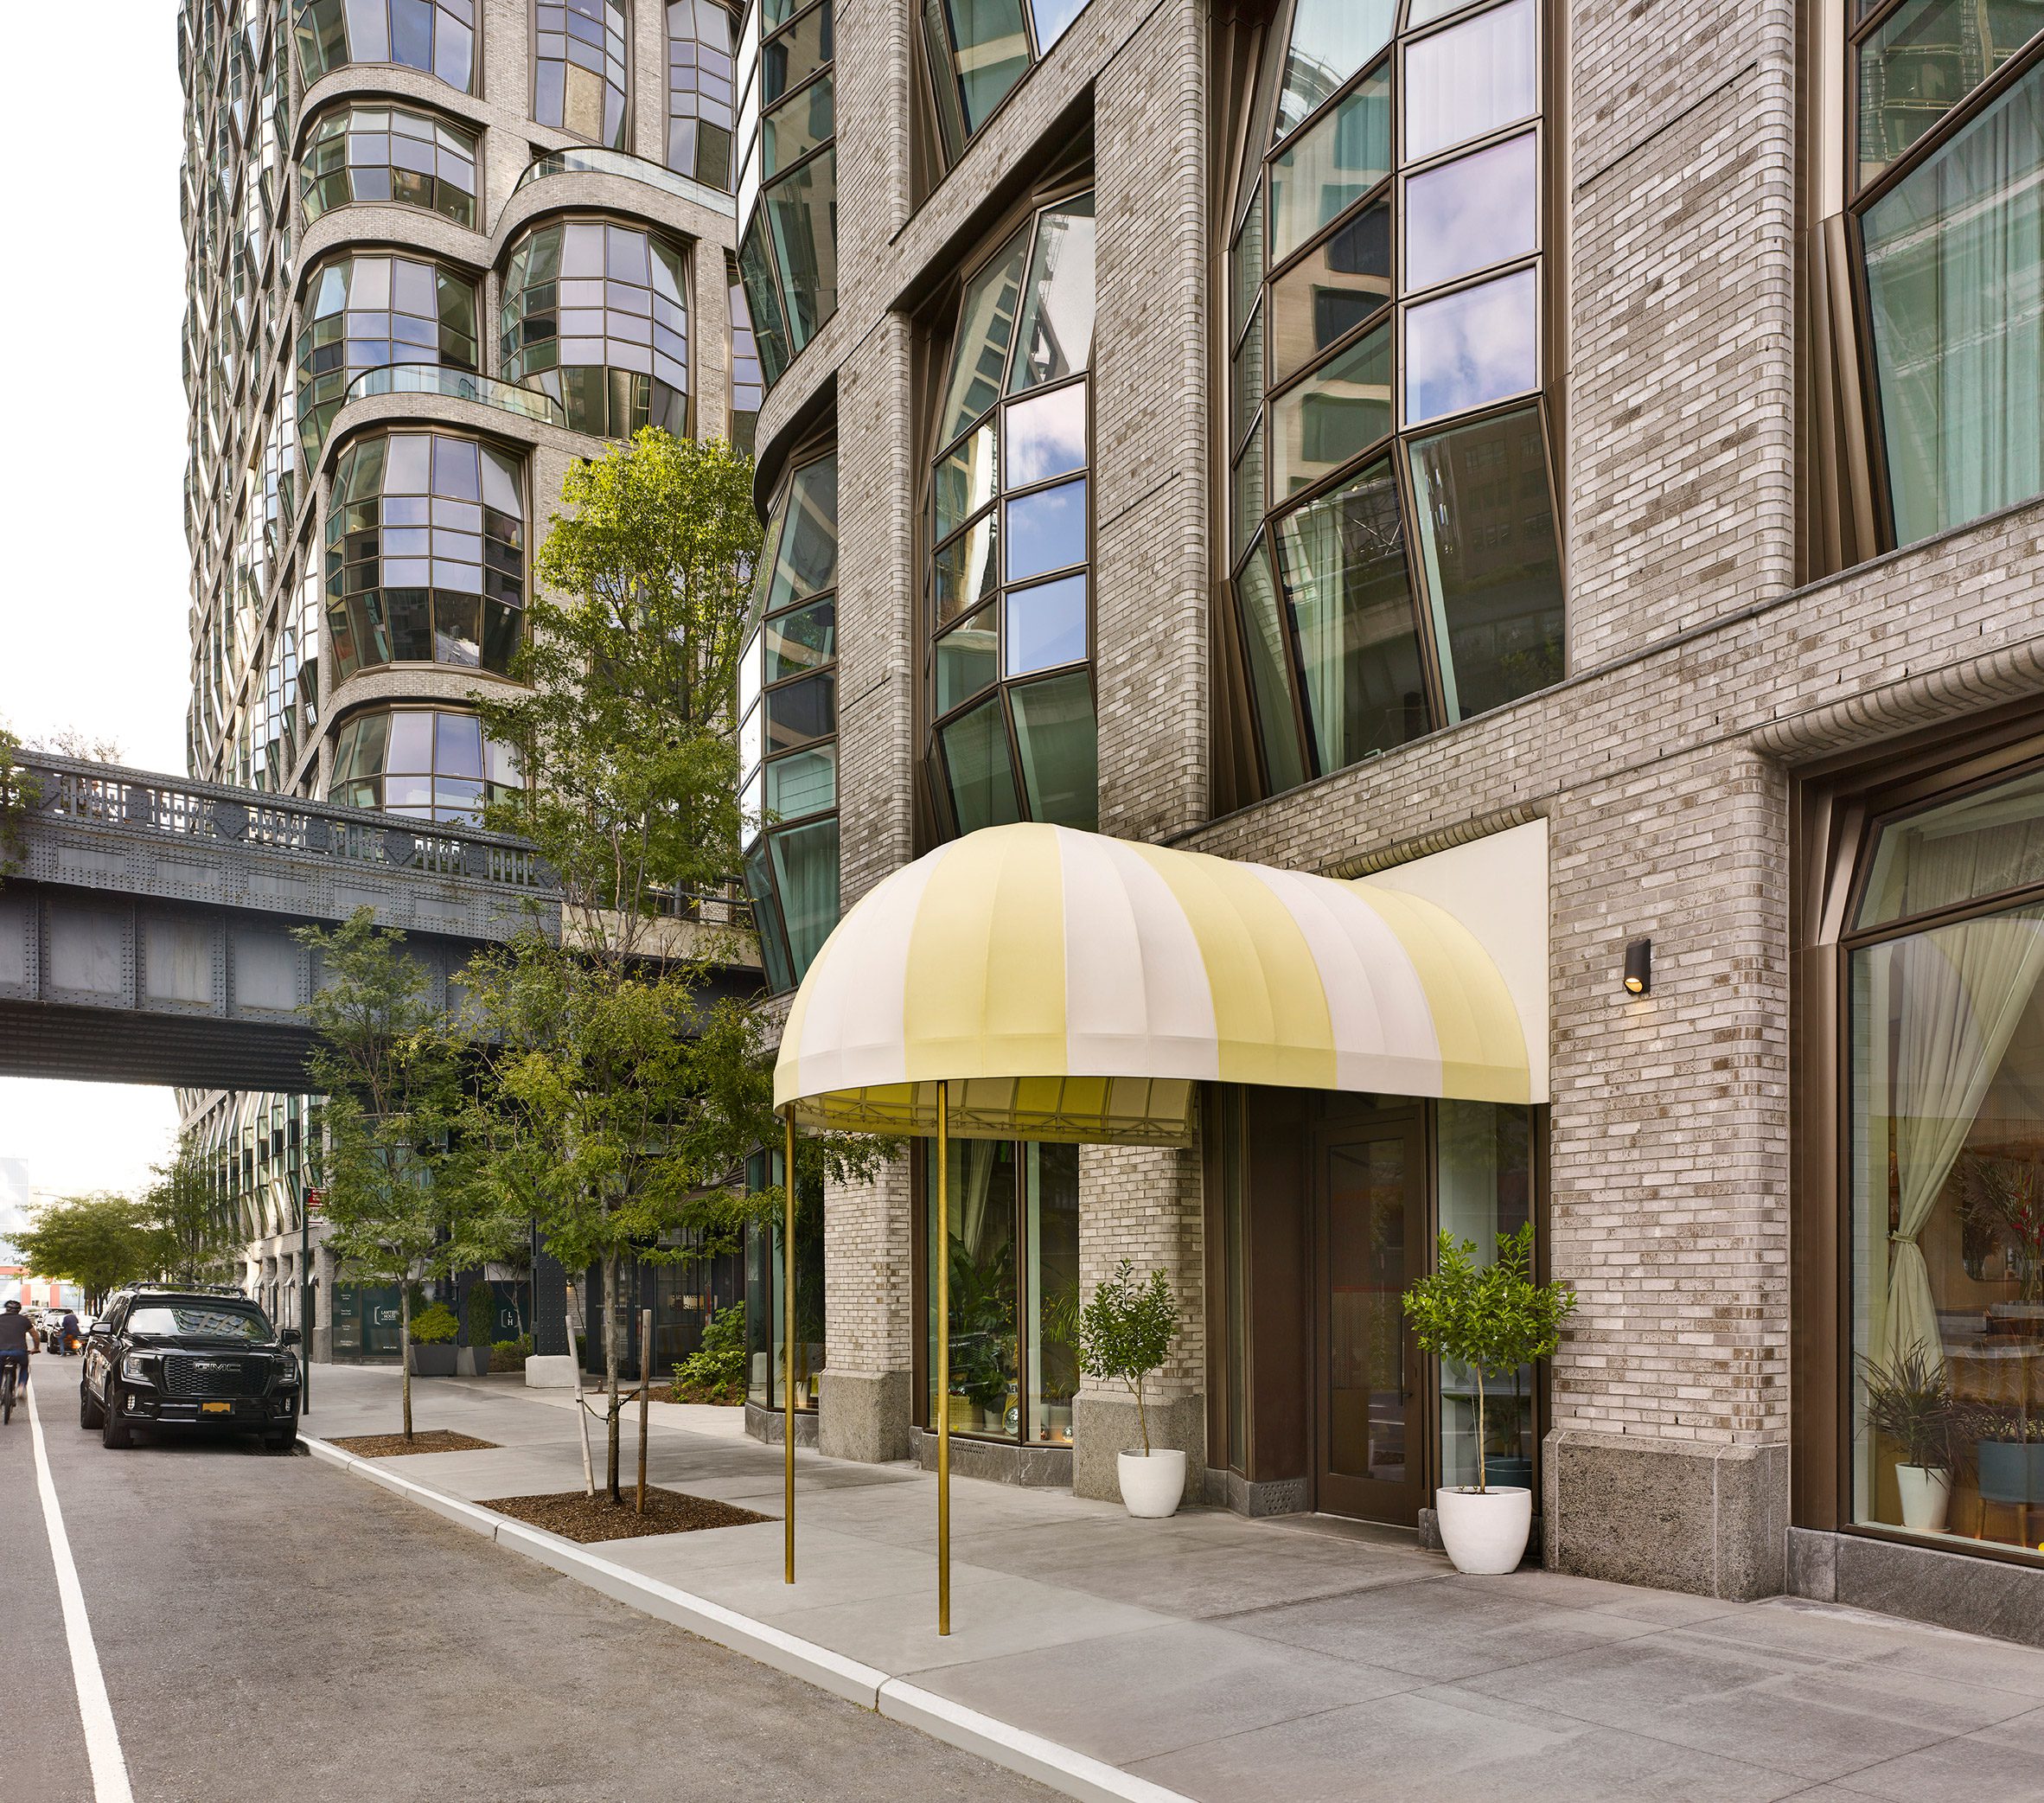 Exterior view of Thomas Heatherwick's Lantern House building, with a white and yellow striped awning